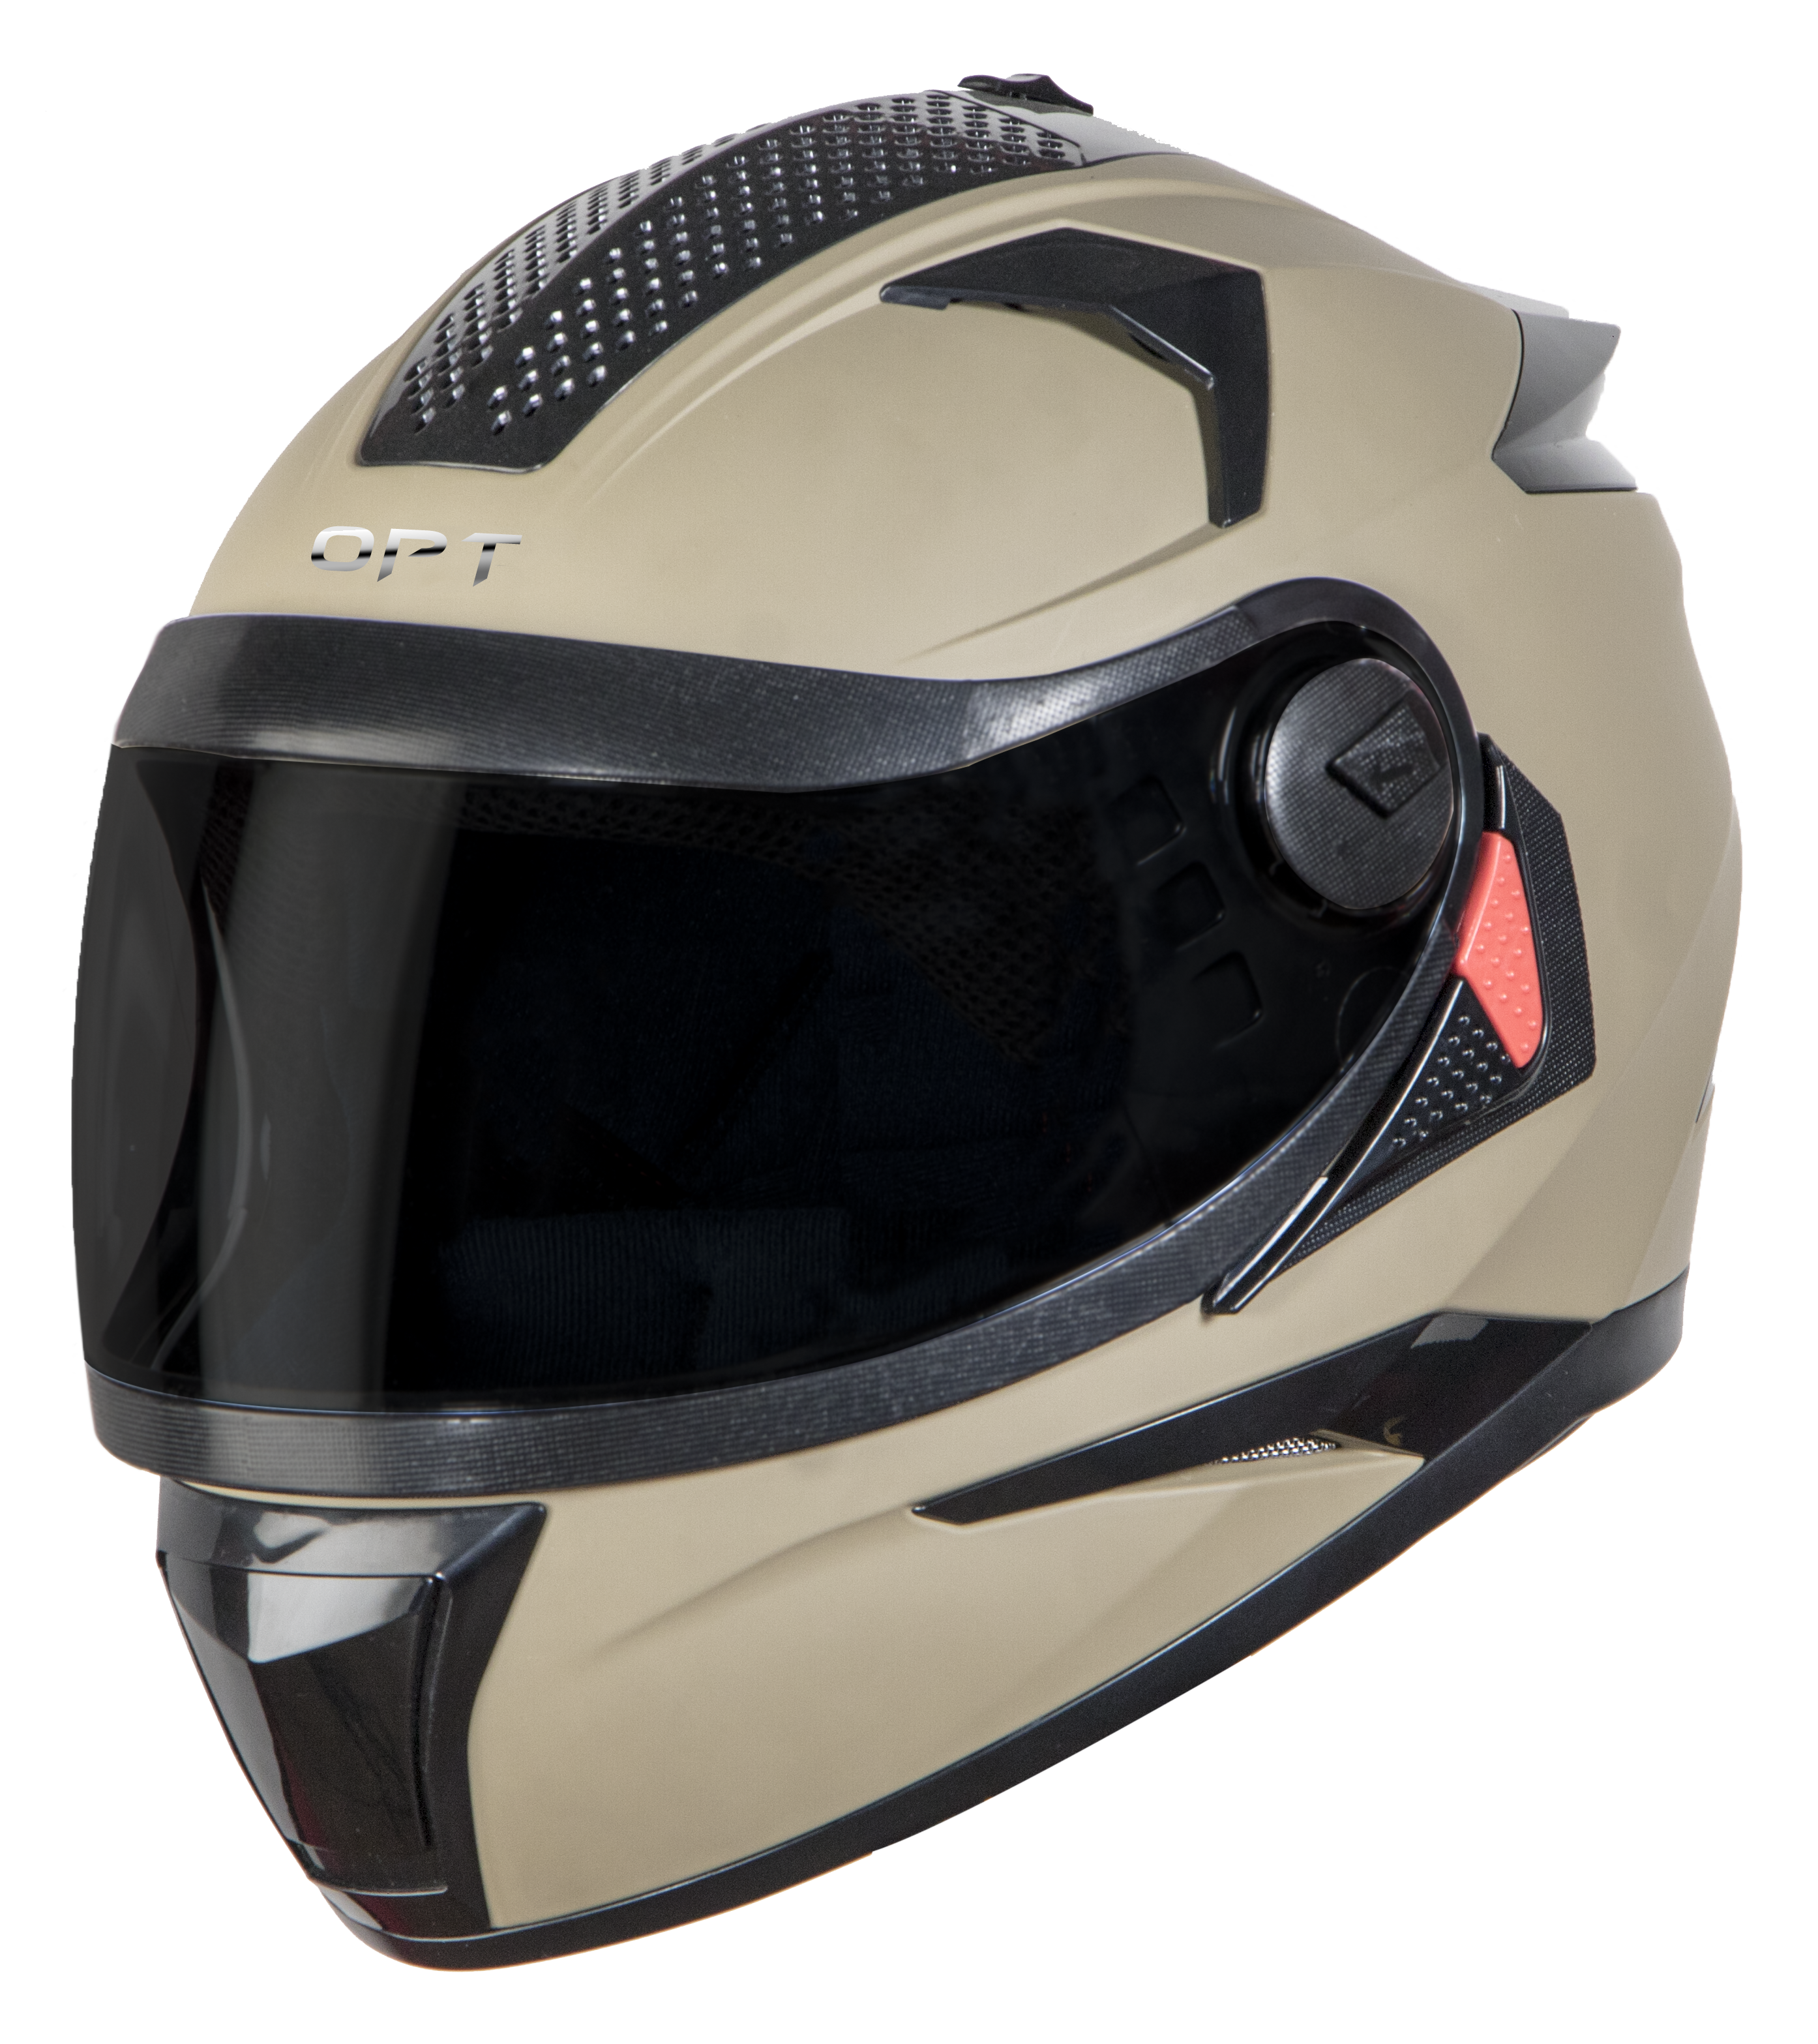 SBH-17 OPT MAT DESERT STORM (WITH EXTRA FREE CABLE LOCK AND CLEAR VISOR)